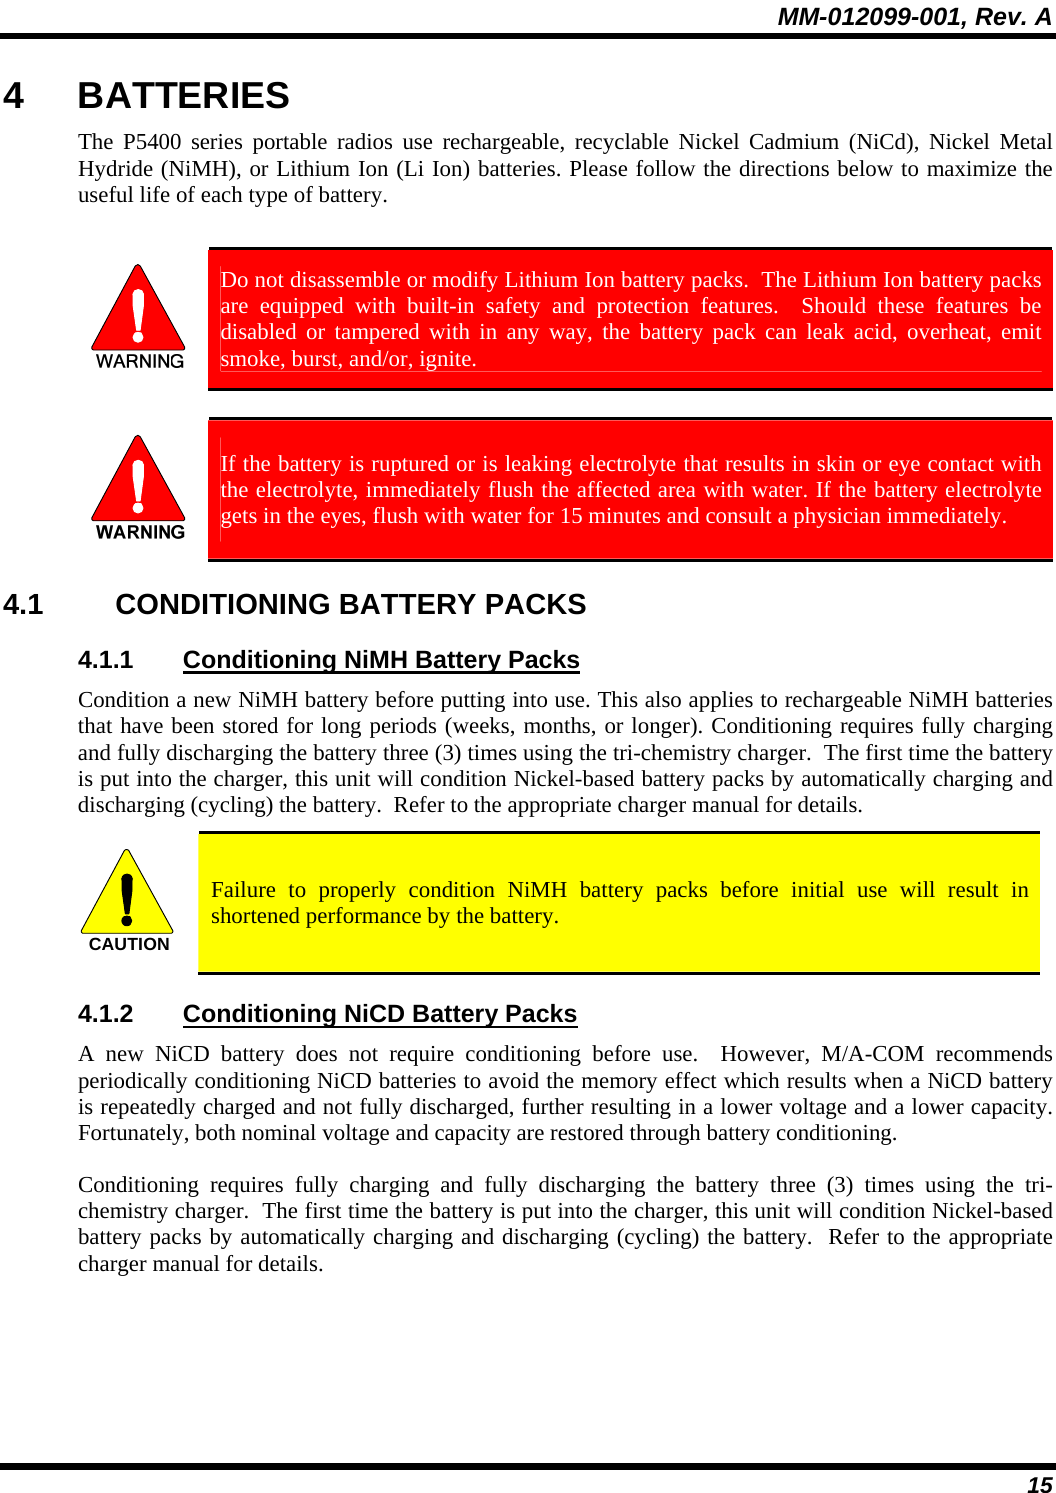 MM-012099-001, Rev. A 15 4 BATTERIES The P5400 series portable radios use rechargeable, recyclable Nickel Cadmium (NiCd), Nickel Metal Hydride (NiMH), or Lithium Ion (Li Ion) batteries. Please follow the directions below to maximize the useful life of each type of battery.   Do not disassemble or modify Lithium Ion battery packs.  The Lithium Ion battery packs are equipped with built-in safety and protection features.  Should these features be disabled or tampered with in any way, the battery pack can leak acid, overheat, emit smoke, burst, and/or, ignite.   If the battery is ruptured or is leaking electrolyte that results in skin or eye contact with the electrolyte, immediately flush the affected area with water. If the battery electrolyte gets in the eyes, flush with water for 15 minutes and consult a physician immediately. 4.1 CONDITIONING BATTERY PACKS 4.1.1  Conditioning NiMH Battery Packs Condition a new NiMH battery before putting into use. This also applies to rechargeable NiMH batteries that have been stored for long periods (weeks, months, or longer). Conditioning requires fully charging and fully discharging the battery three (3) times using the tri-chemistry charger.  The first time the battery is put into the charger, this unit will condition Nickel-based battery packs by automatically charging and discharging (cycling) the battery.  Refer to the appropriate charger manual for details. CAUTION  Failure to properly condition NiMH battery packs before initial use will result in shortened performance by the battery. 4.1.2  Conditioning NiCD Battery Packs A new NiCD battery does not require conditioning before use.  However, M/A-COM recommends periodically conditioning NiCD batteries to avoid the memory effect which results when a NiCD battery is repeatedly charged and not fully discharged, further resulting in a lower voltage and a lower capacity. Fortunately, both nominal voltage and capacity are restored through battery conditioning.   Conditioning requires fully charging and fully discharging the battery three (3) times using the tri-chemistry charger.  The first time the battery is put into the charger, this unit will condition Nickel-based battery packs by automatically charging and discharging (cycling) the battery.  Refer to the appropriate charger manual for details.  